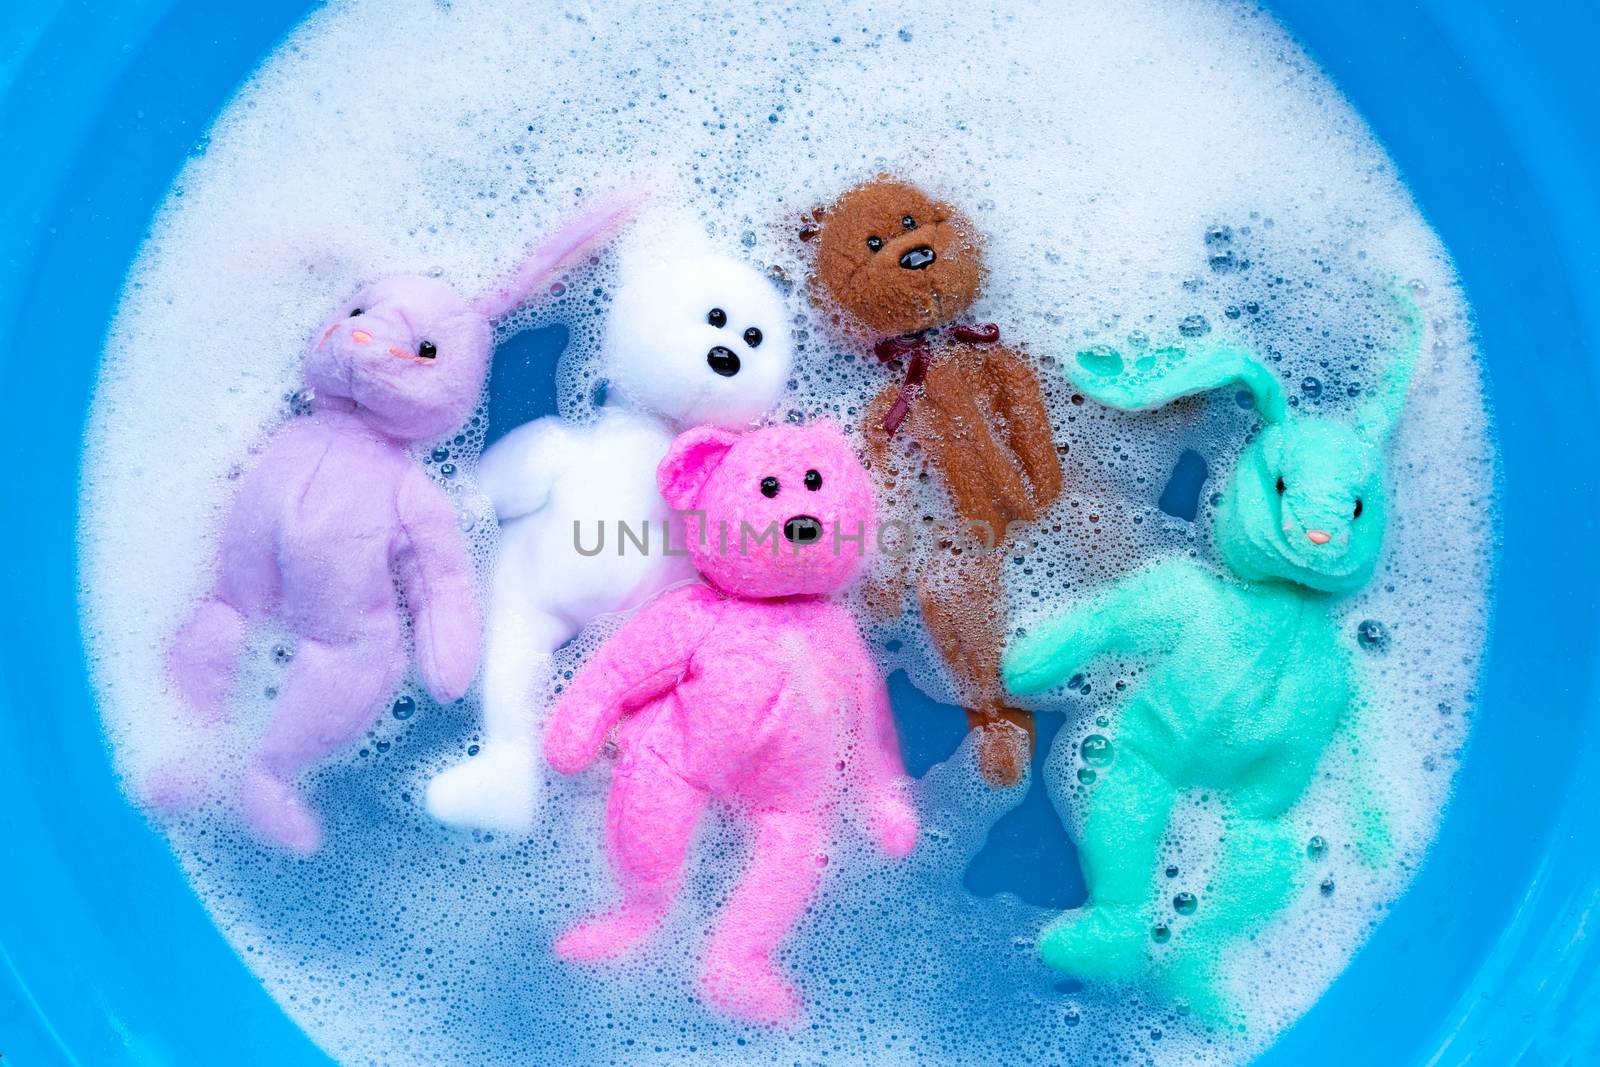 Soak rabbit dolls with  toy teddy bear in laundry detergent wate by Bowonpat